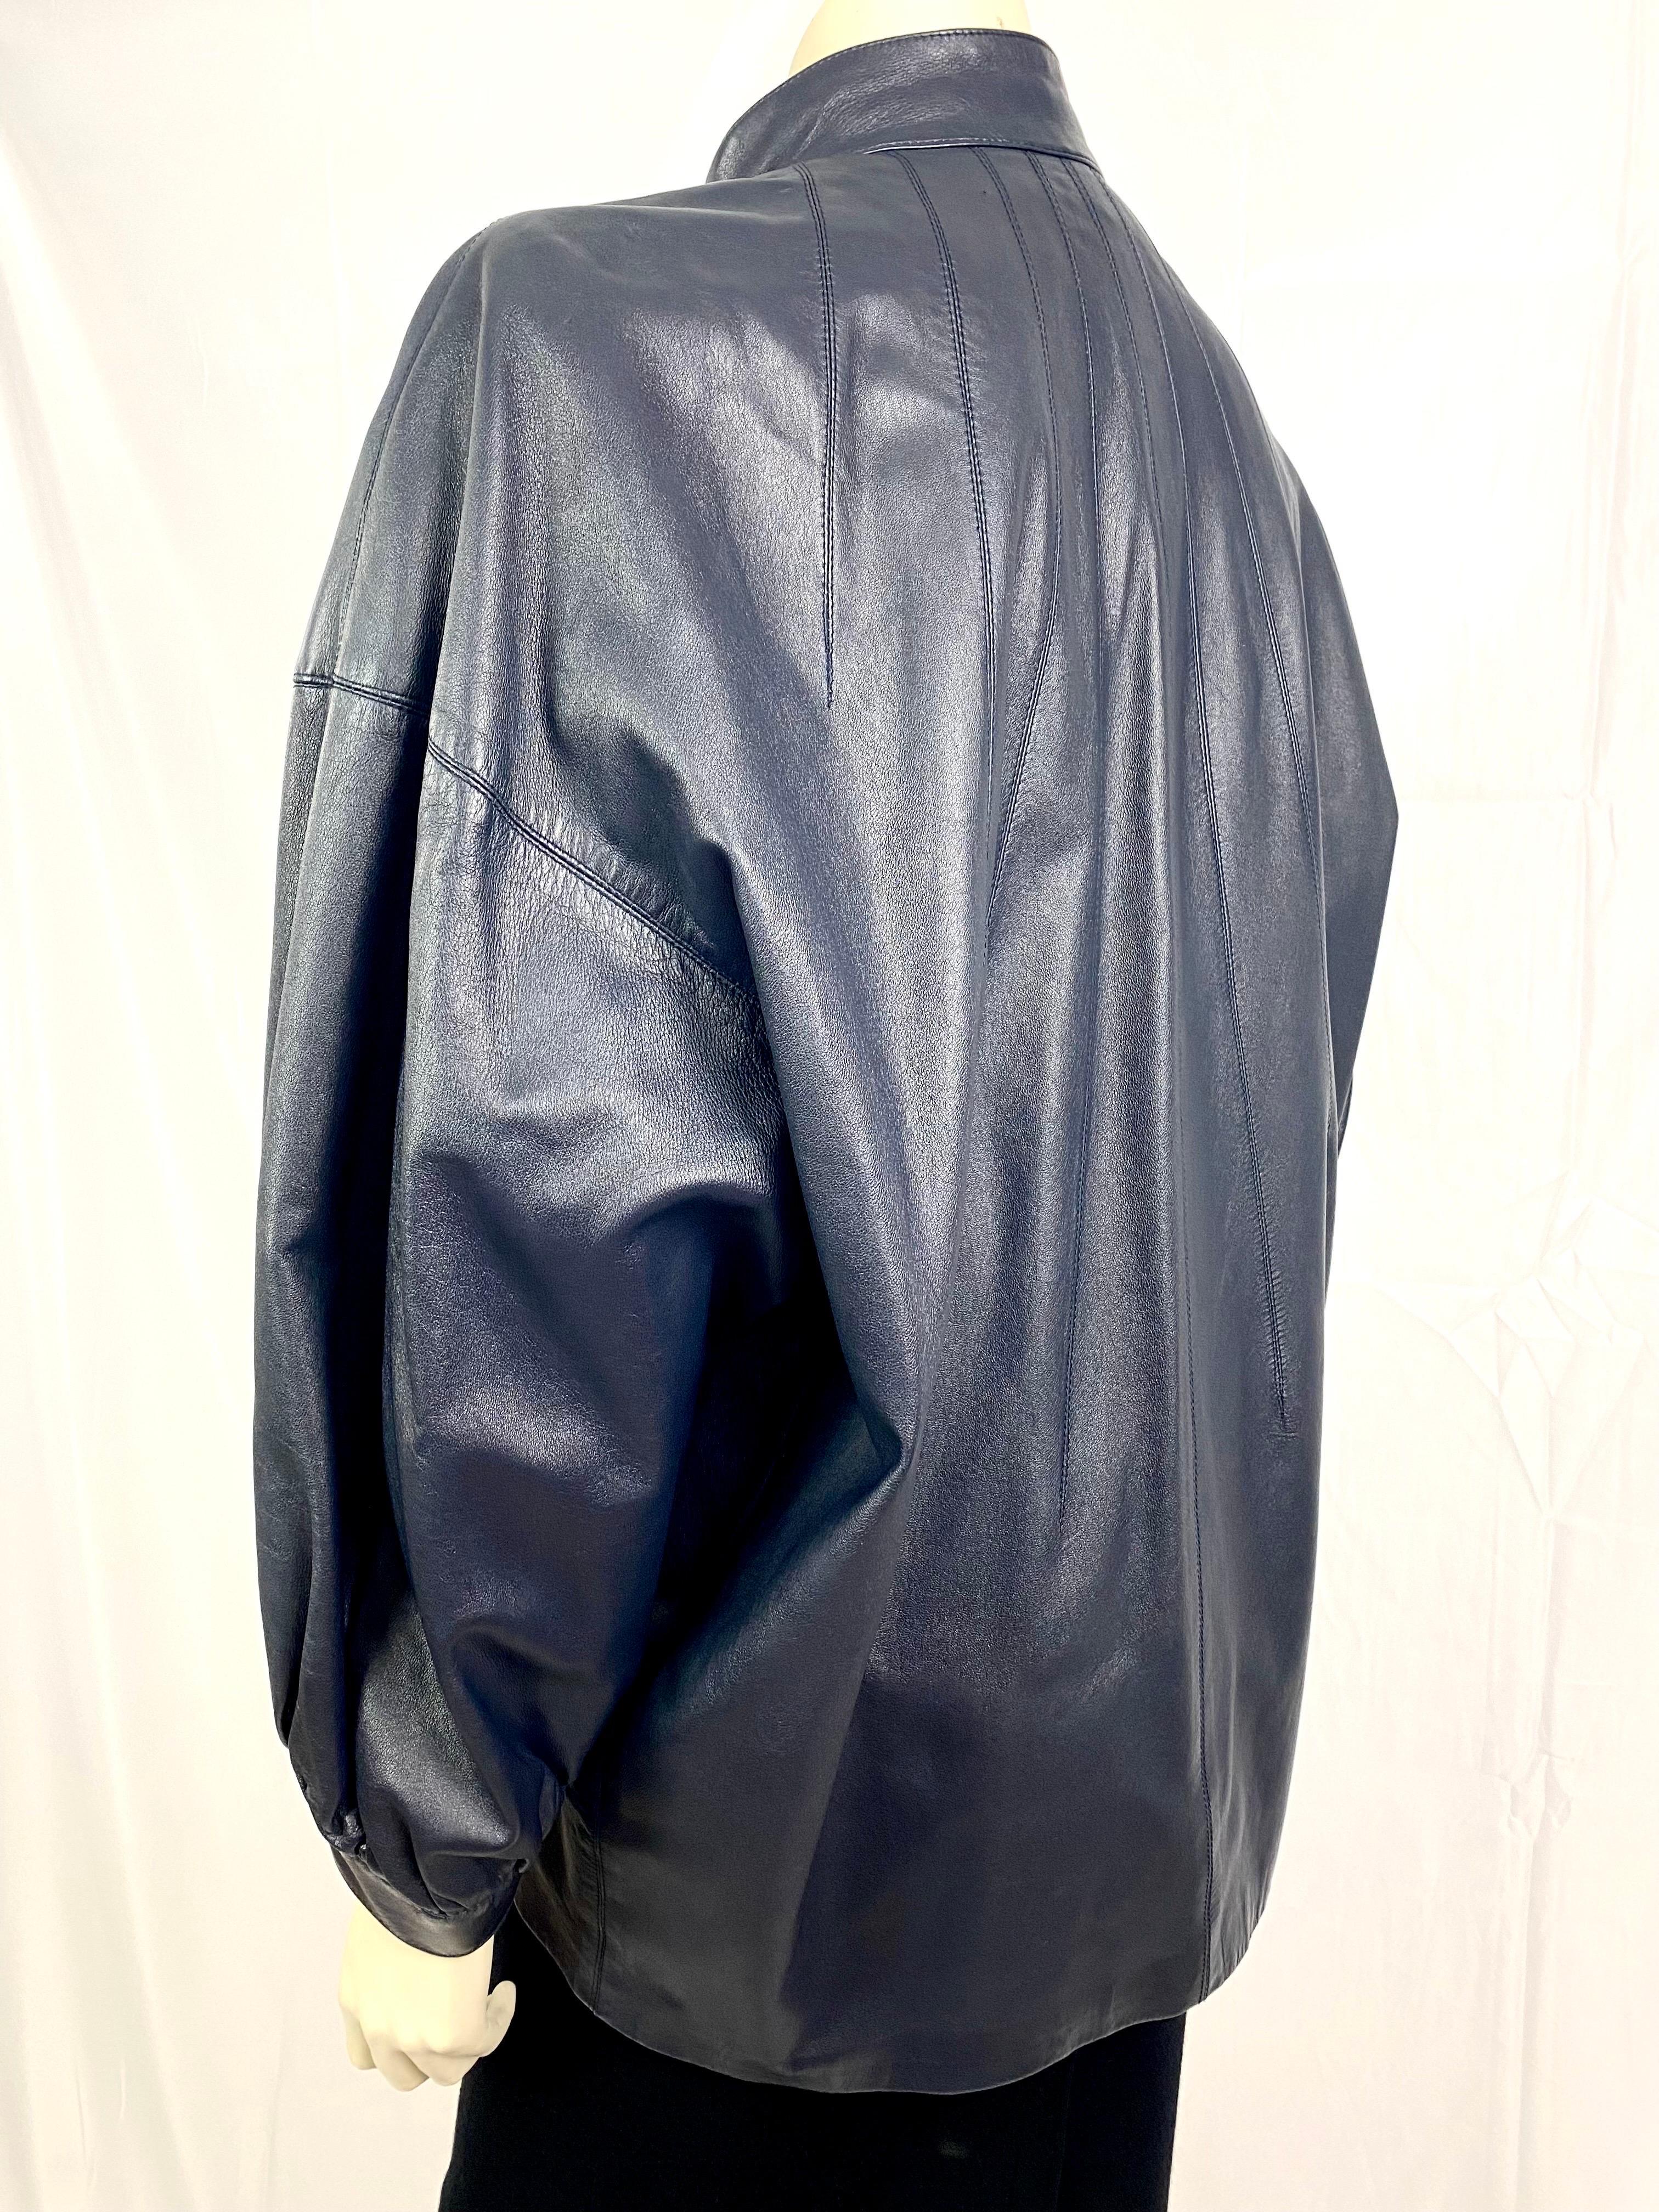 Vintage lamb leather jacket by Yves saint laurent rive gauche  from the 1980s 1